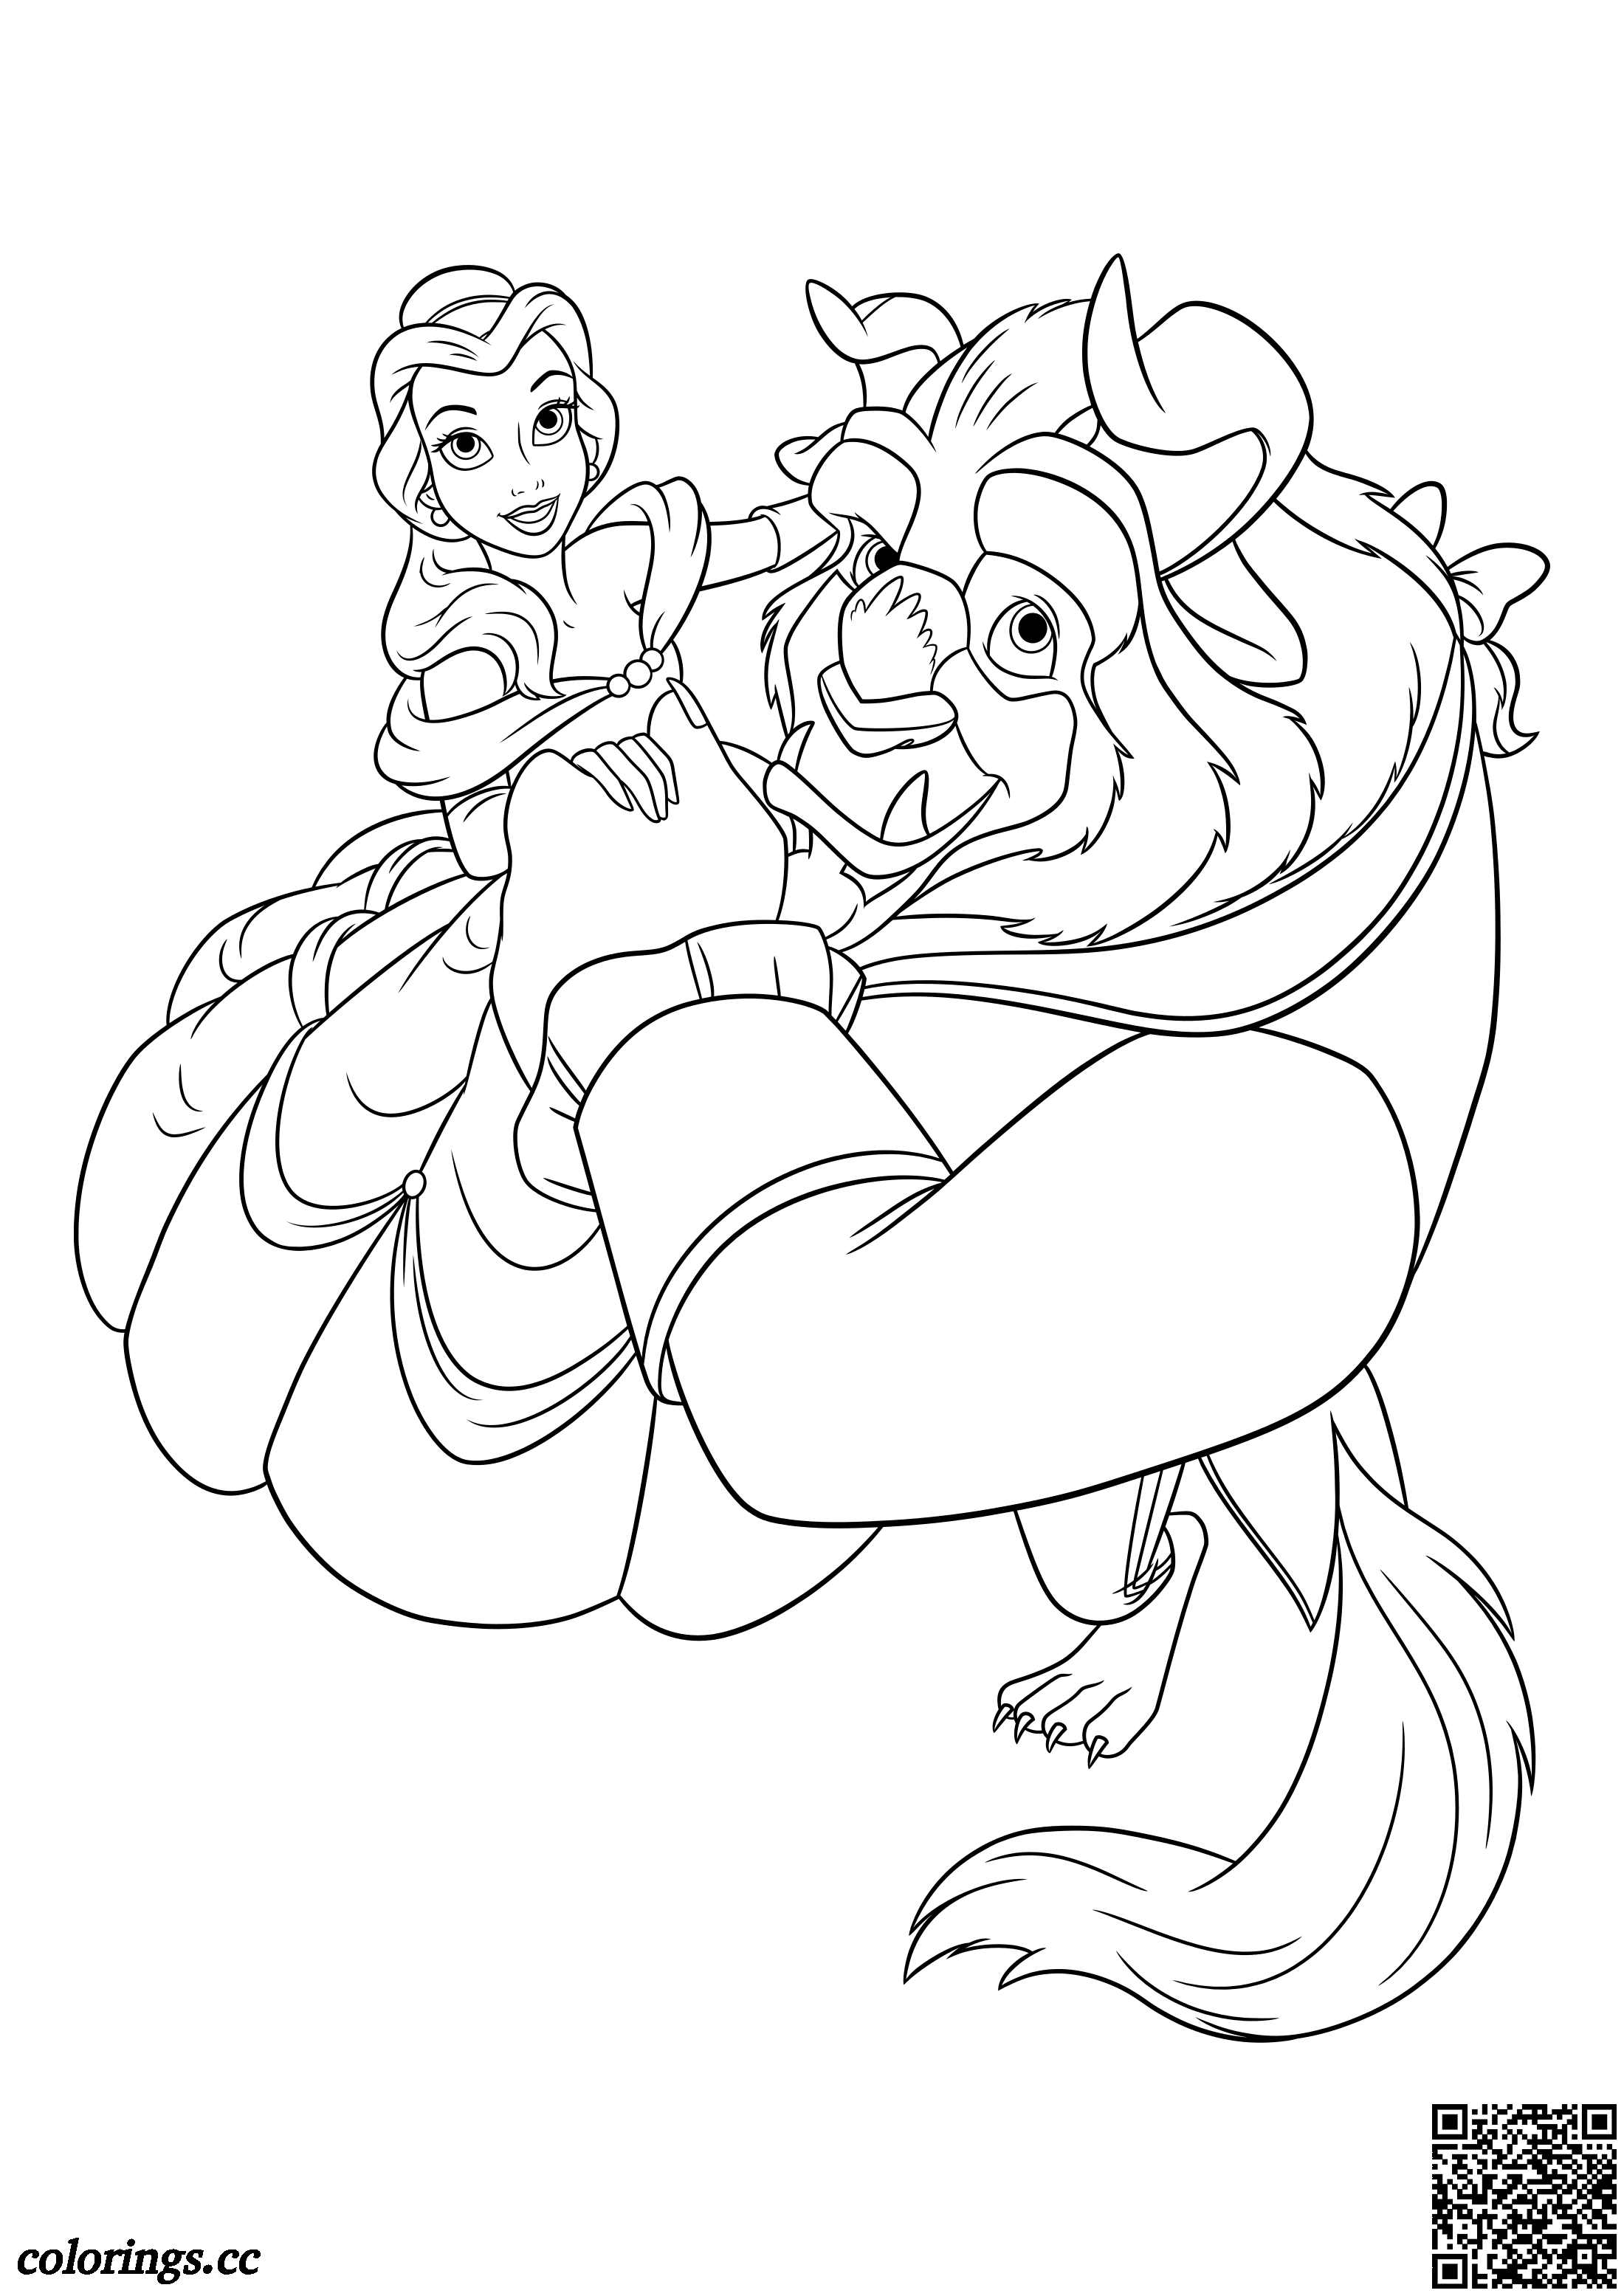 Dance Of Beauty And The Beast Coloring Pages Disney Princesses Coloring Pages Colorings Cc